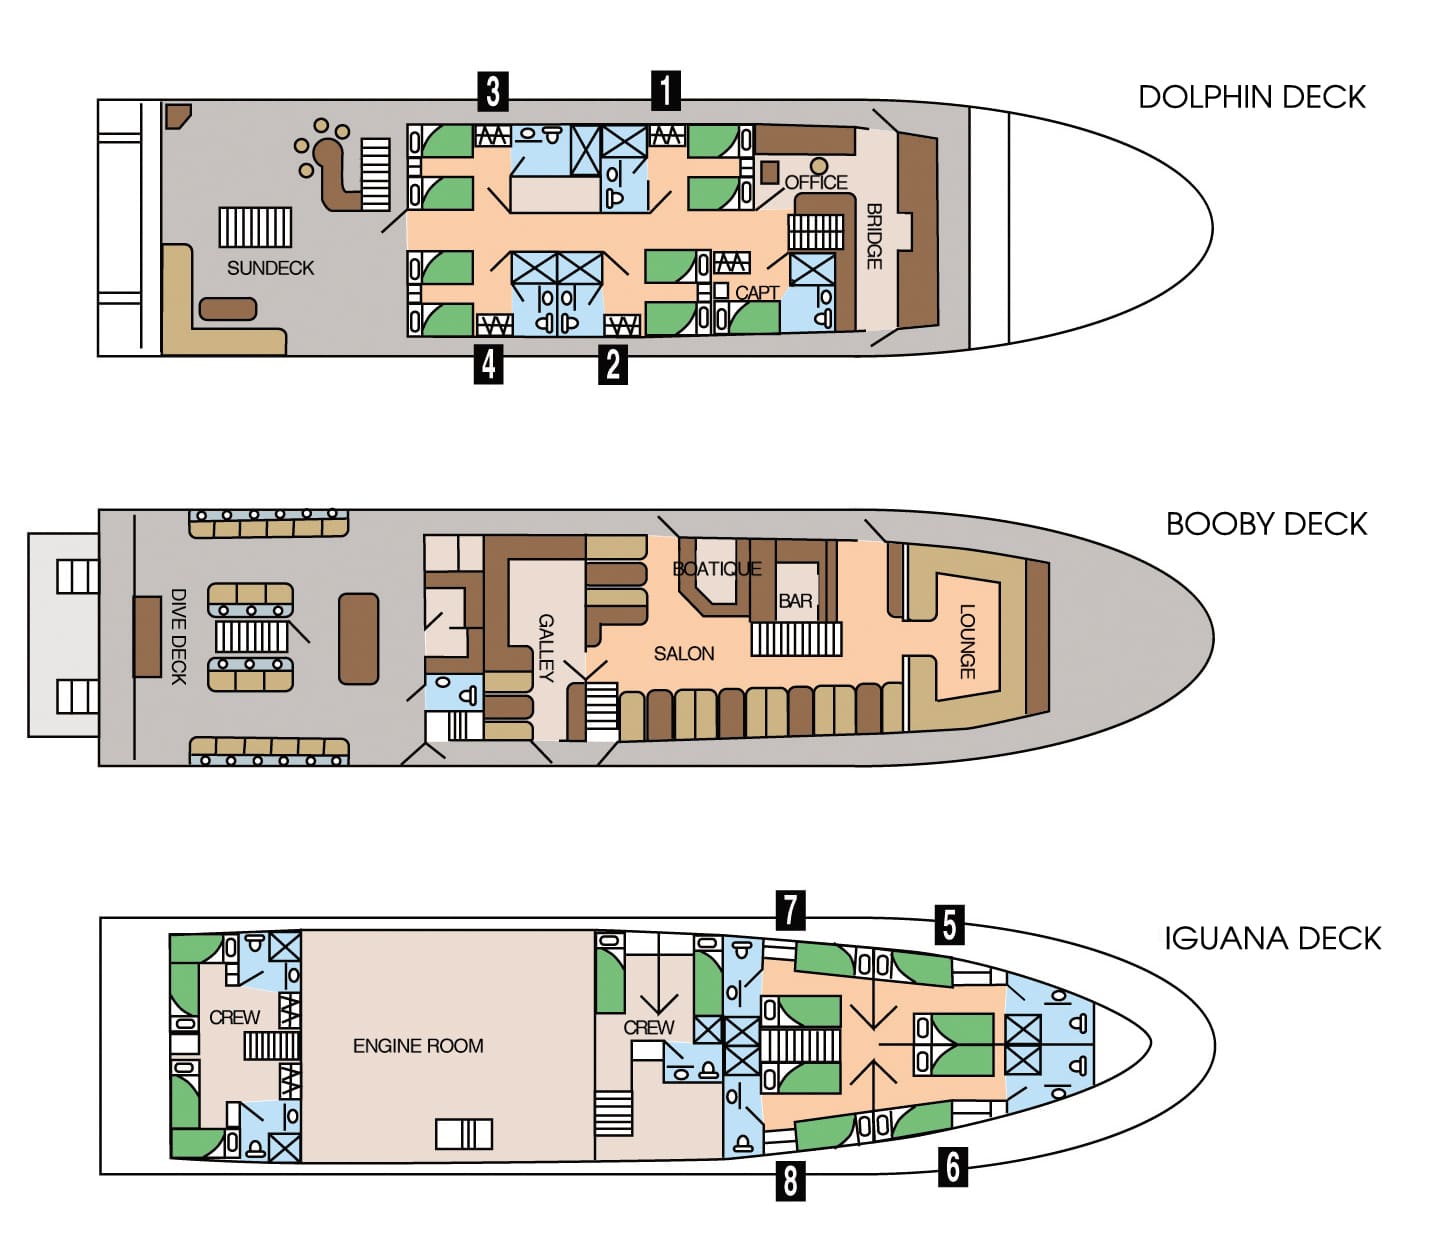 Deck plan of Galapagos Sky dive boat with 3 decks, 8 cabins, indoor & outdoor lounges, bar, dive deck, birdge, sundeck & more.